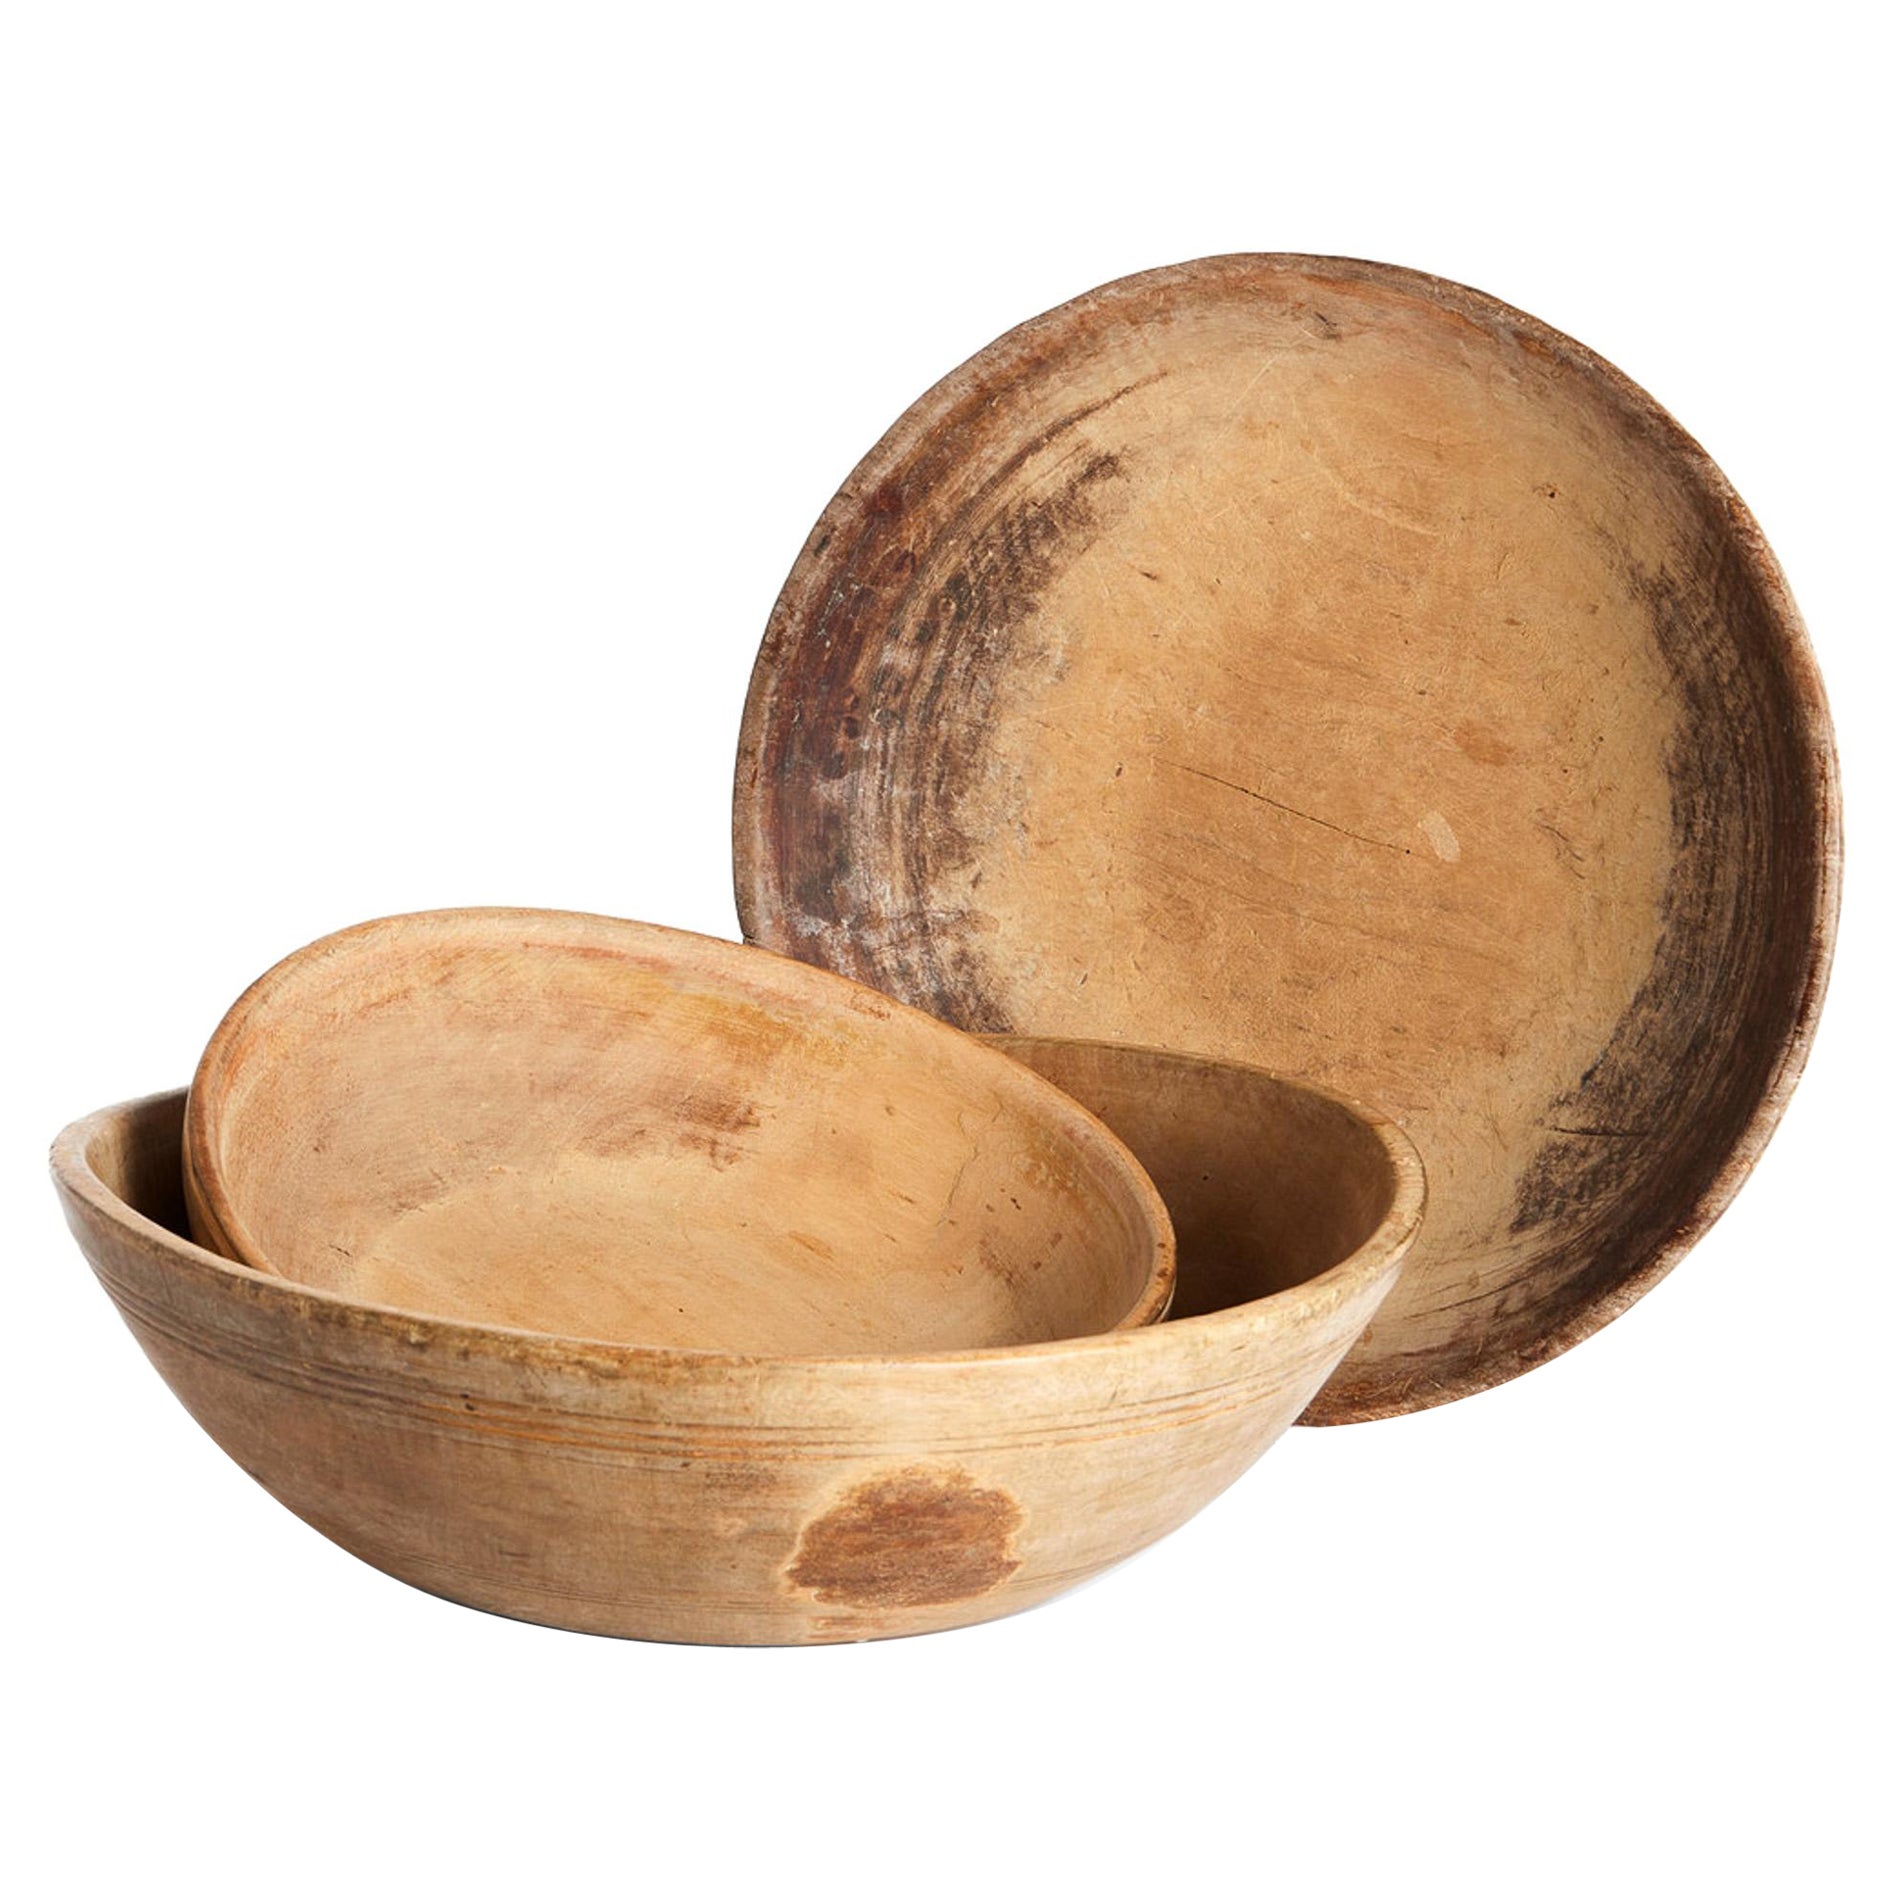 Swedish Antique & Decorative Wooden Bowls in Birch Produced in Sweden Late 1800s